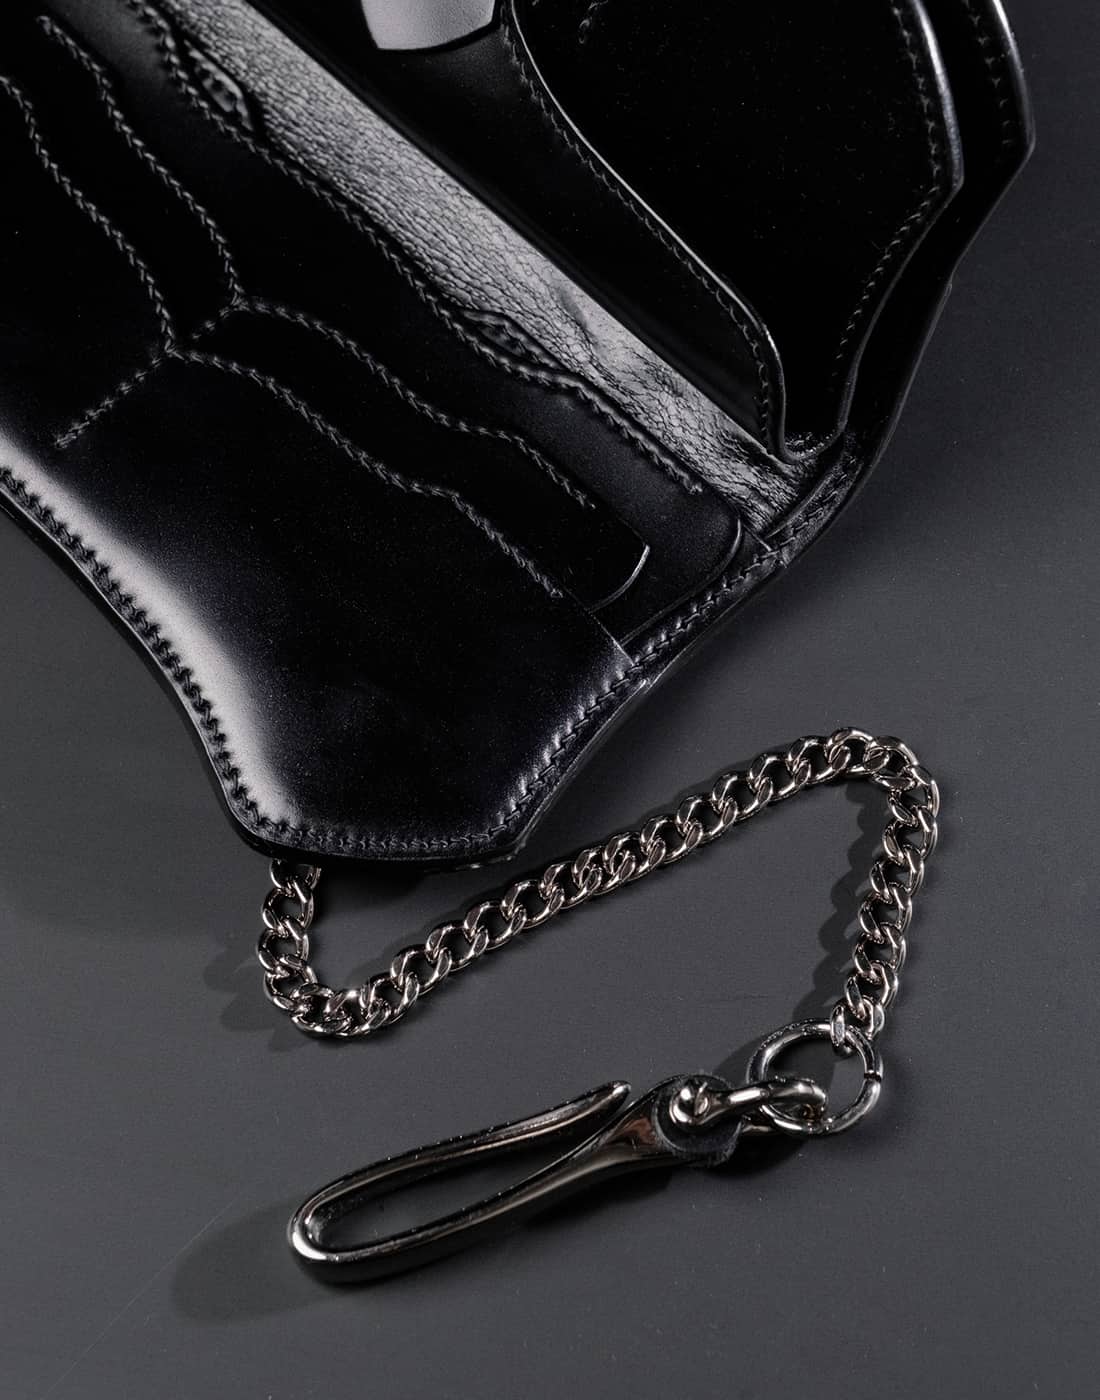 Closeup of black leather wallet and silver chain